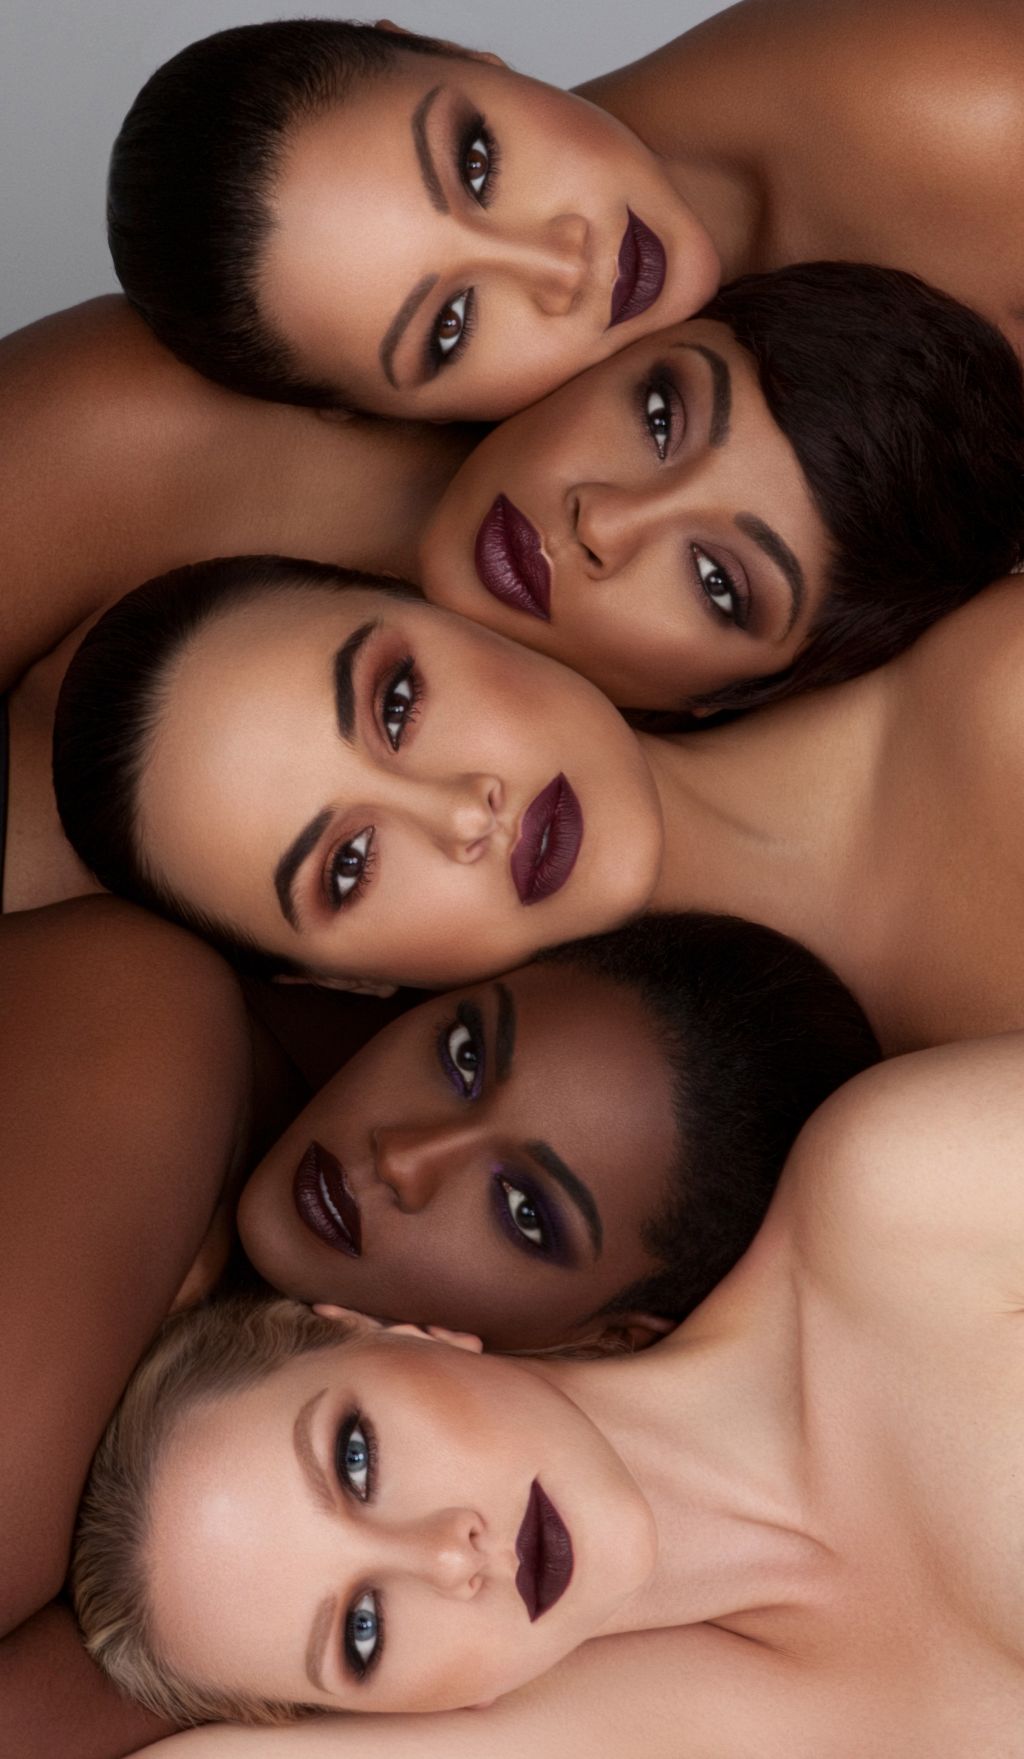 The Model Diversity Project